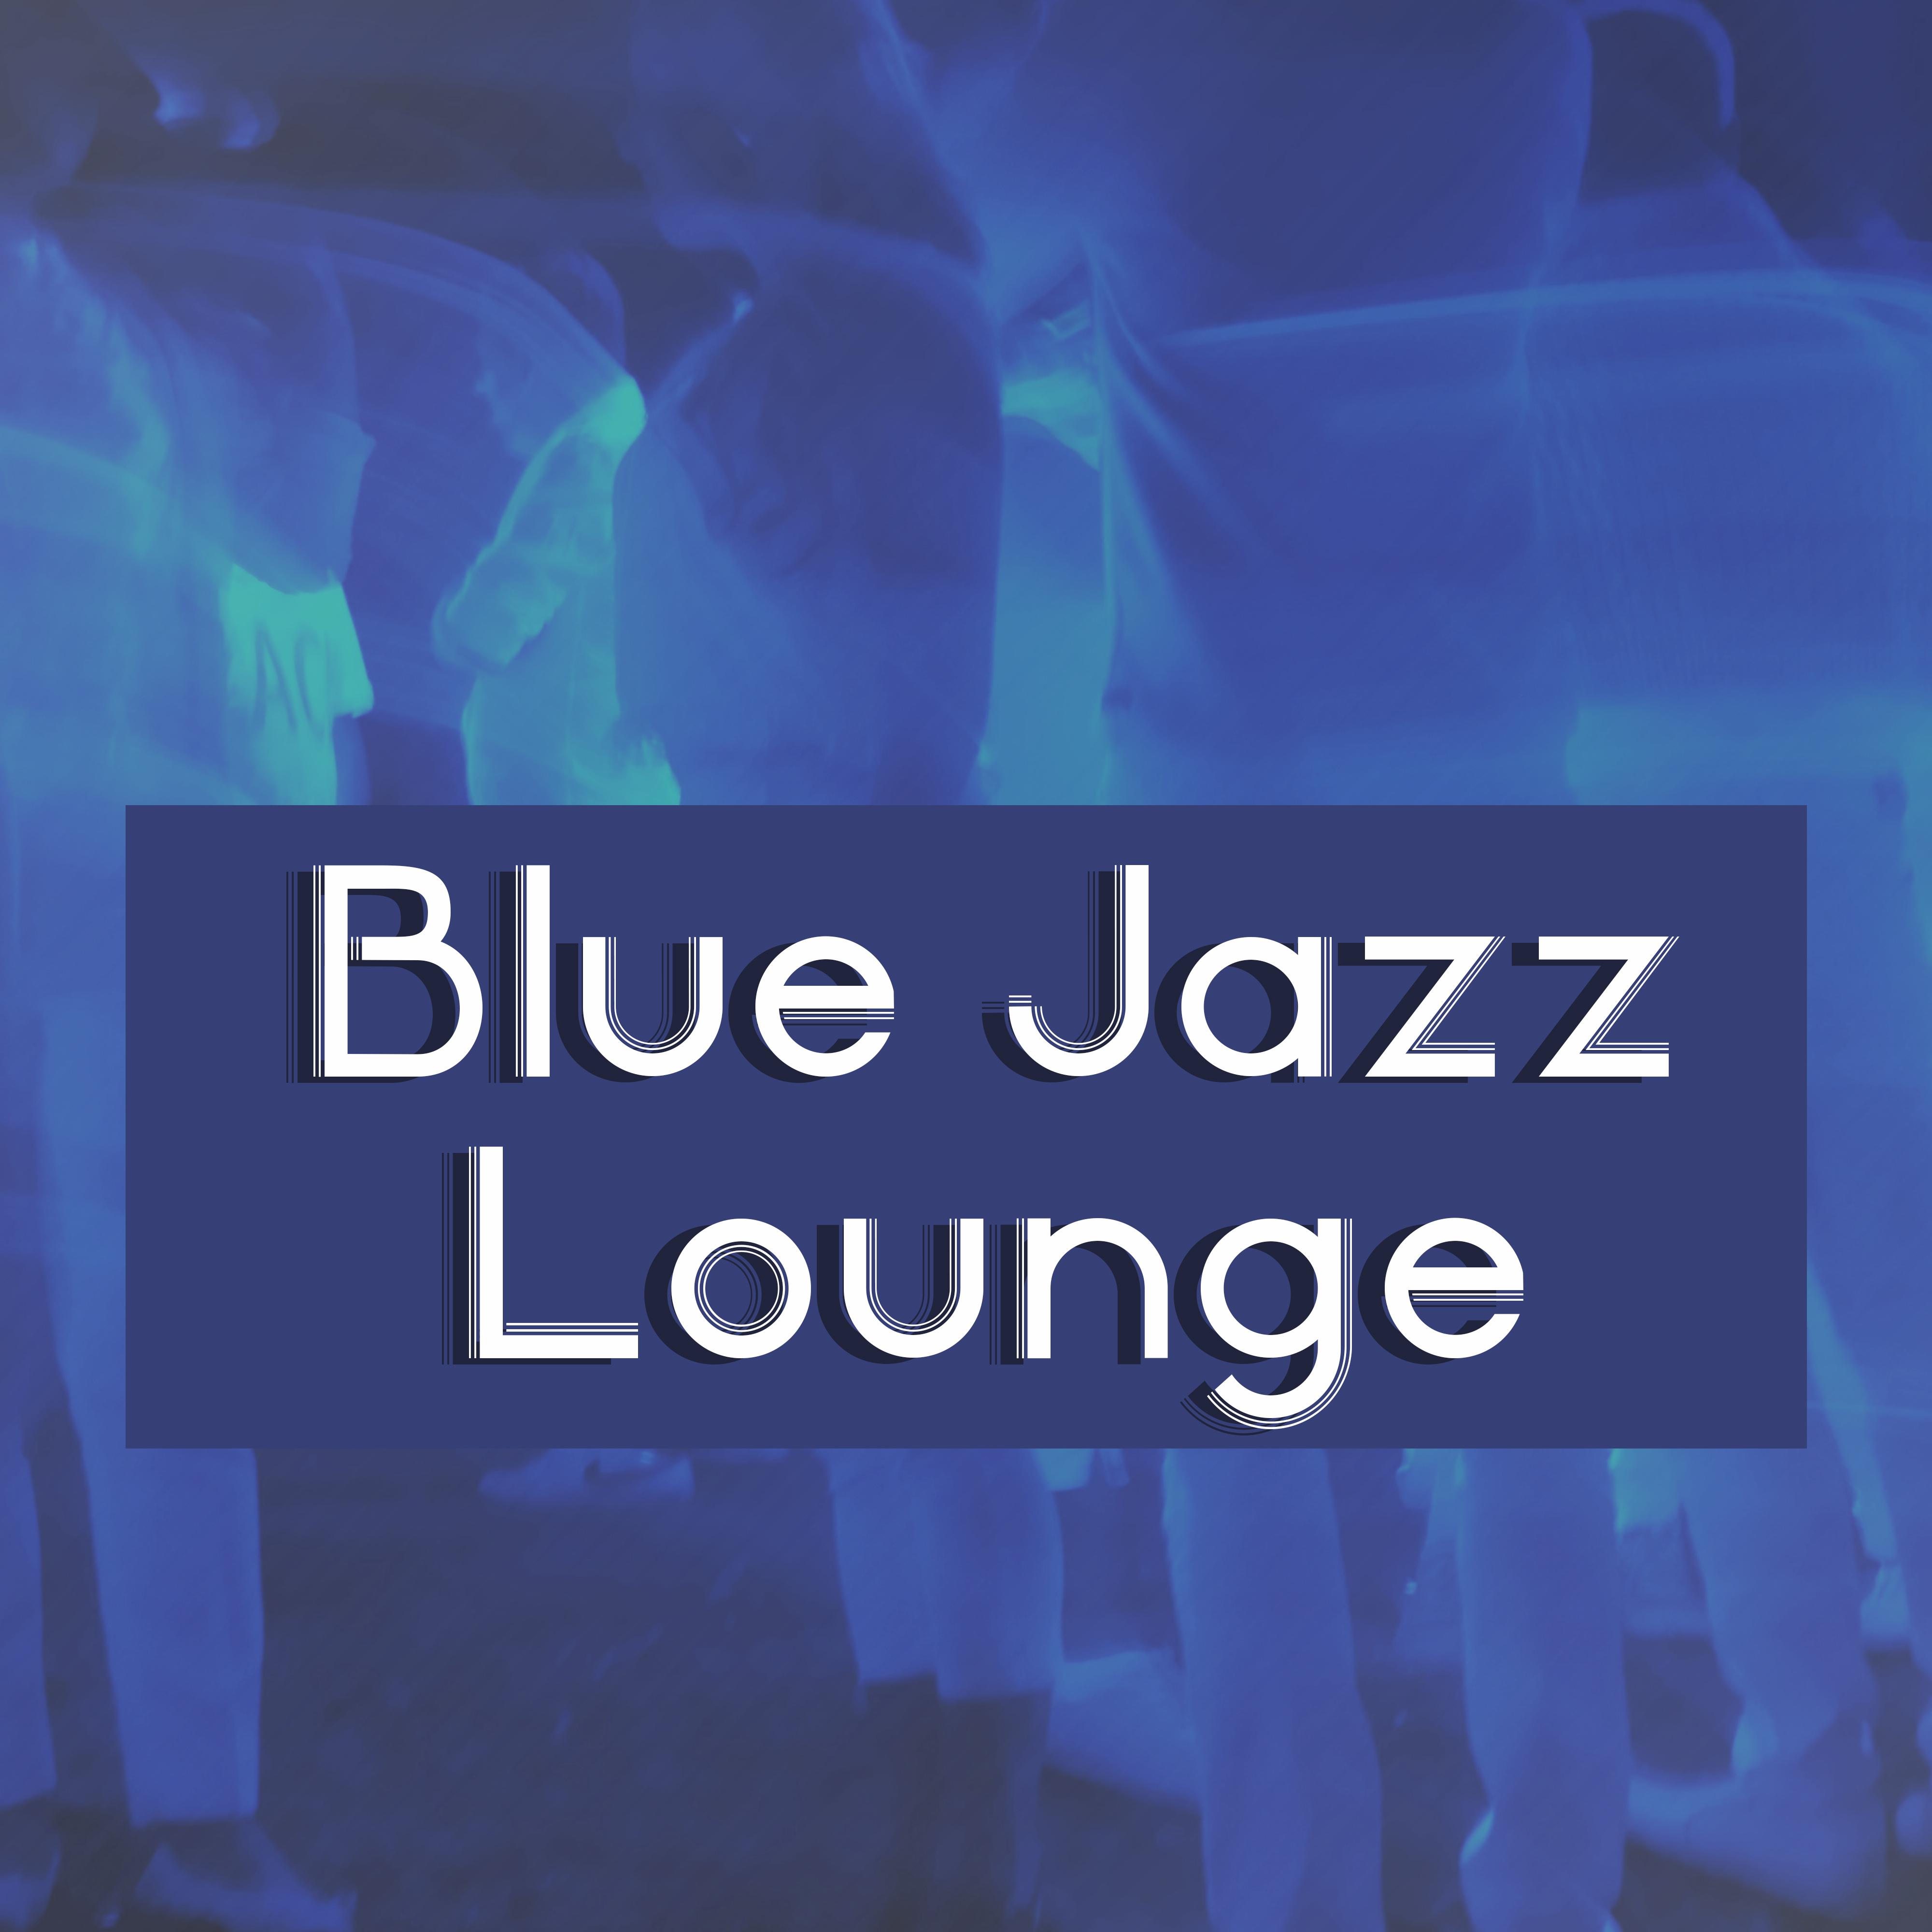 Blue Jazz Lounge – The Piano Bar, Jazz Lounge, Ambient Instrumental, Music for Club